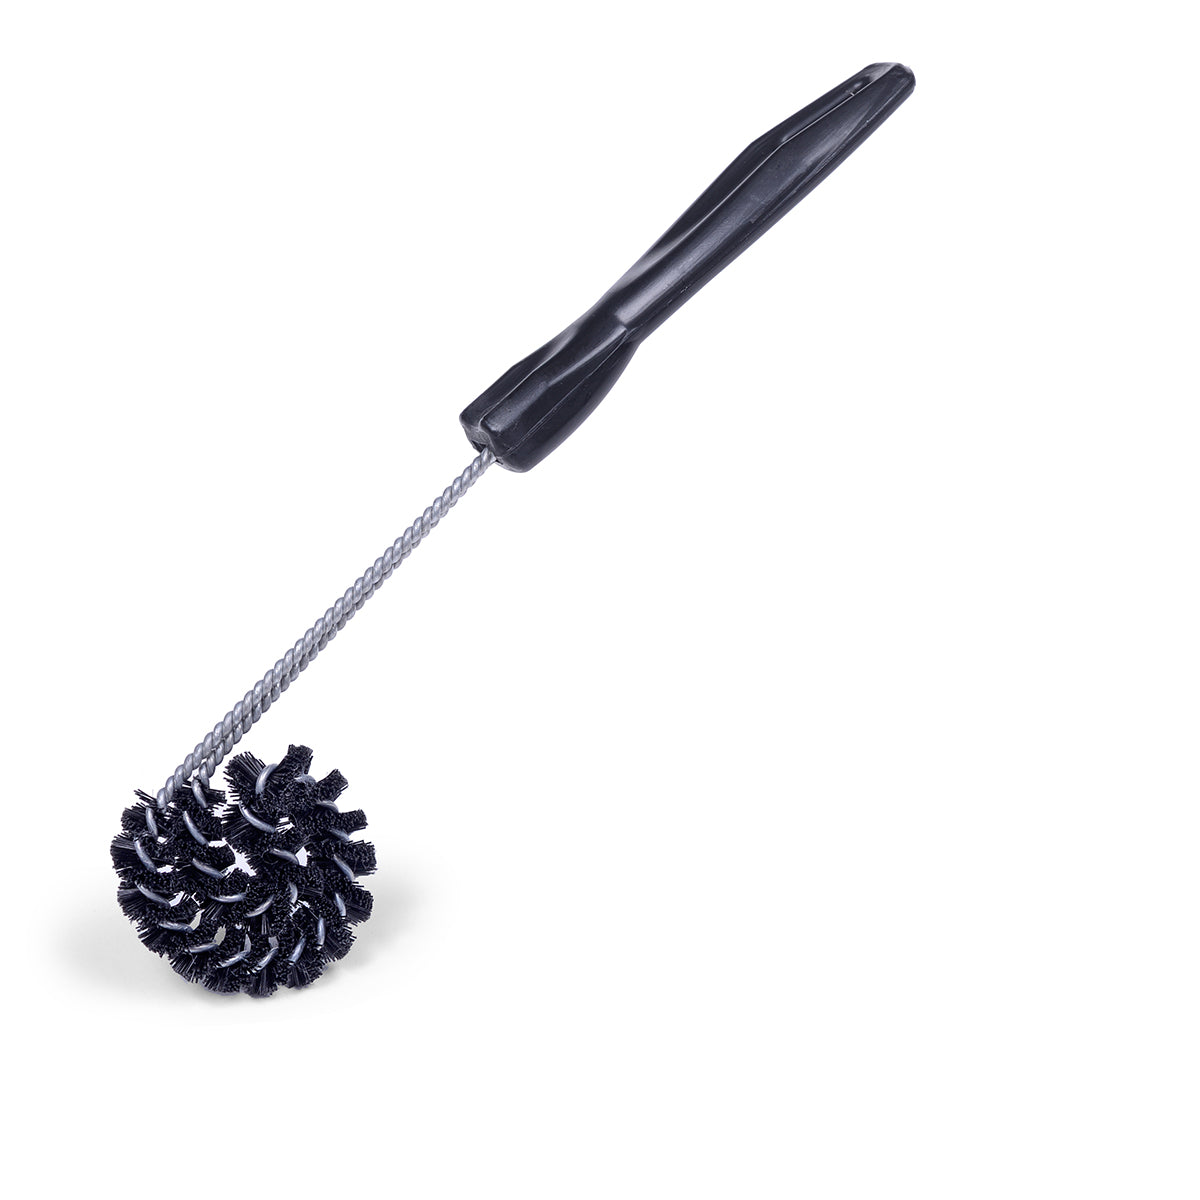 SLIDING WINDOW & SHOWER DOOR TRACK CLEANER, Brushtech Brushes Inc. -  America's #1 Source for all Specialty and Hard-To-Find Brushes - Buy Direct  and Save!